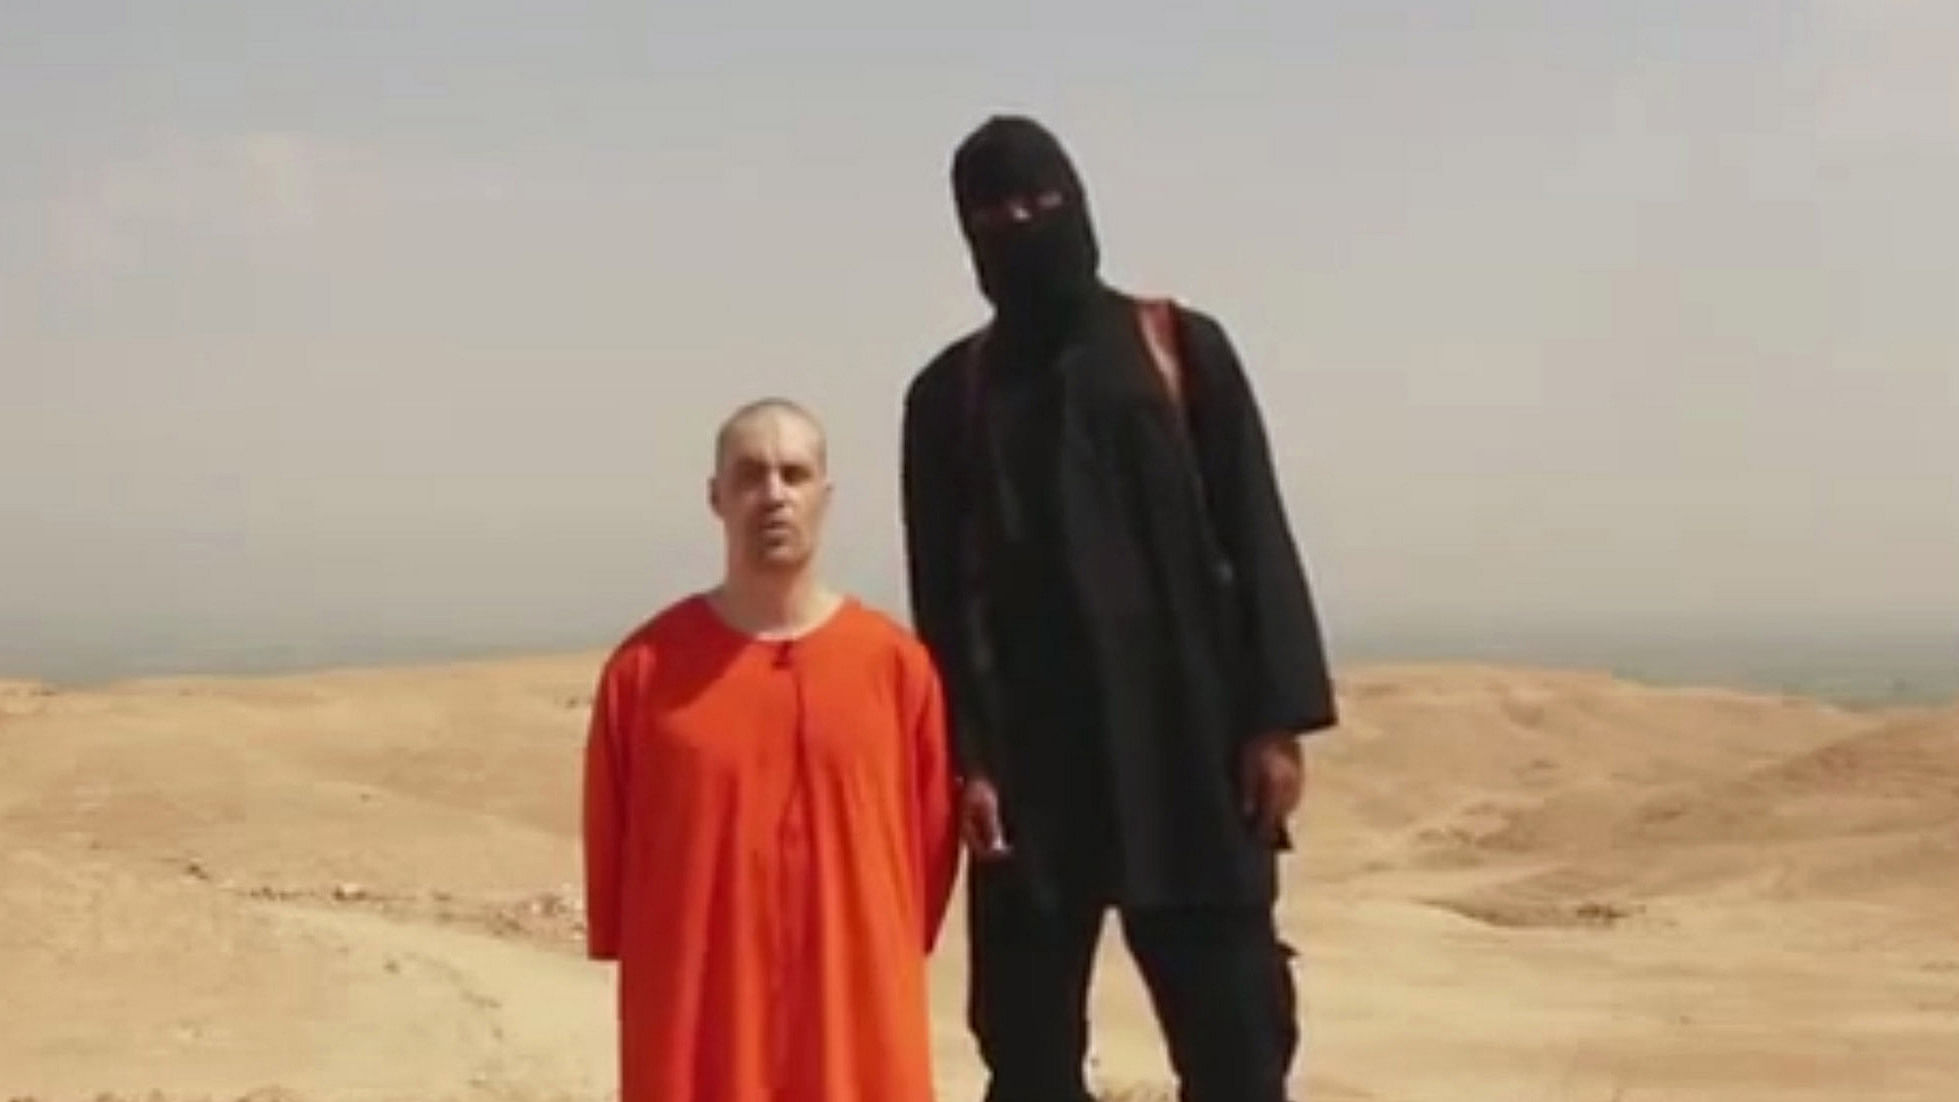 This image is from a video released by Islamic State militants on August 19, 2014 to show the killing of journalist James Foley. (Photo: AP)